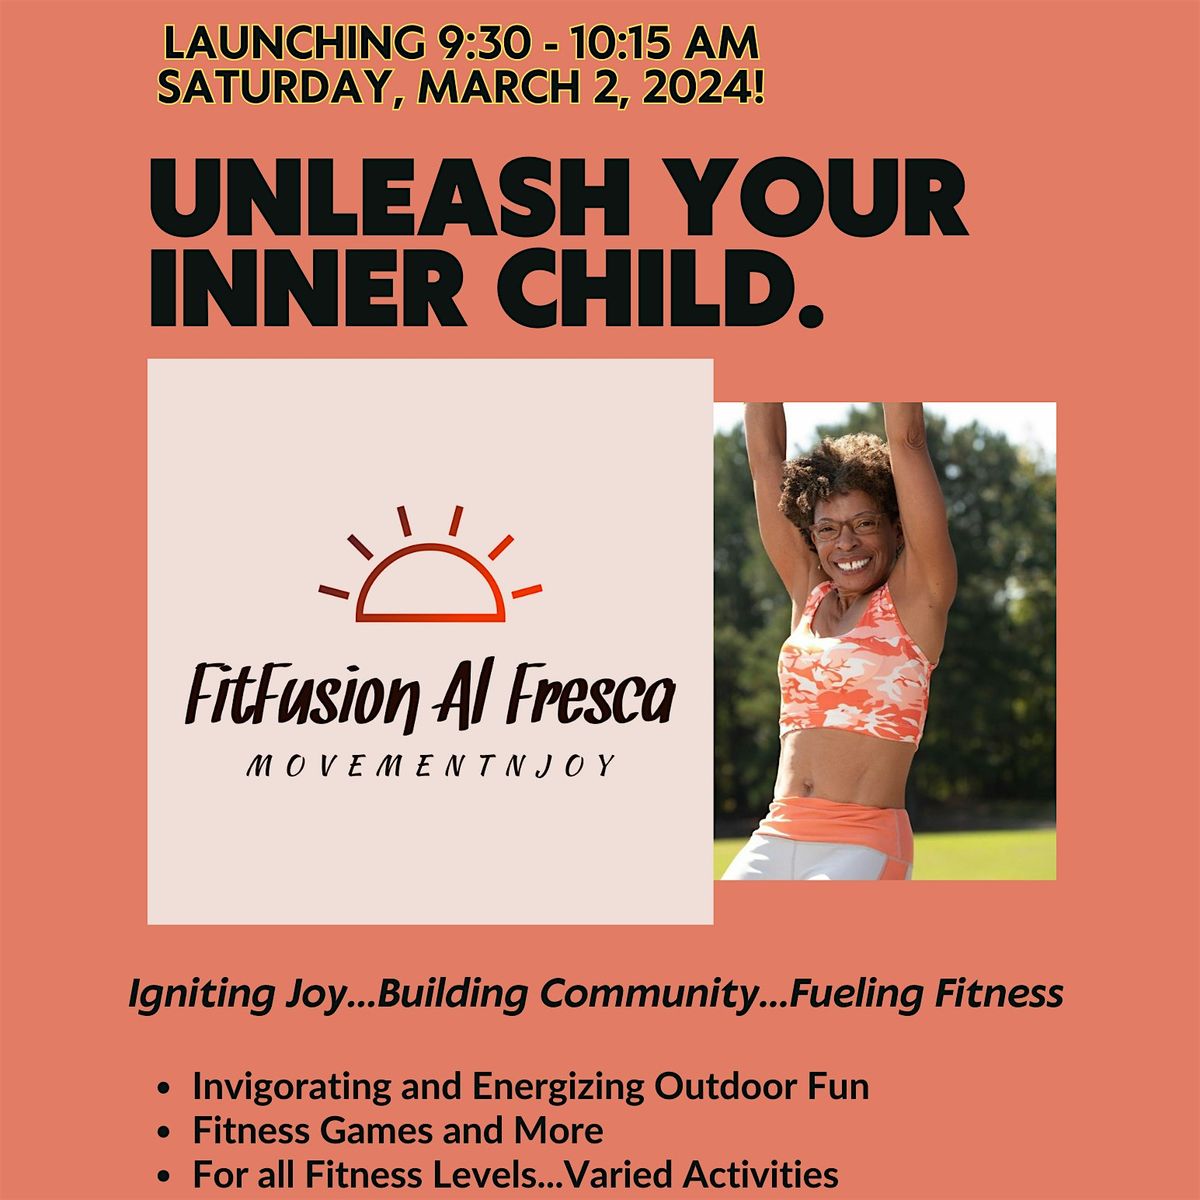 April 27th FitFusion Al Fresca! FREE for First timers!